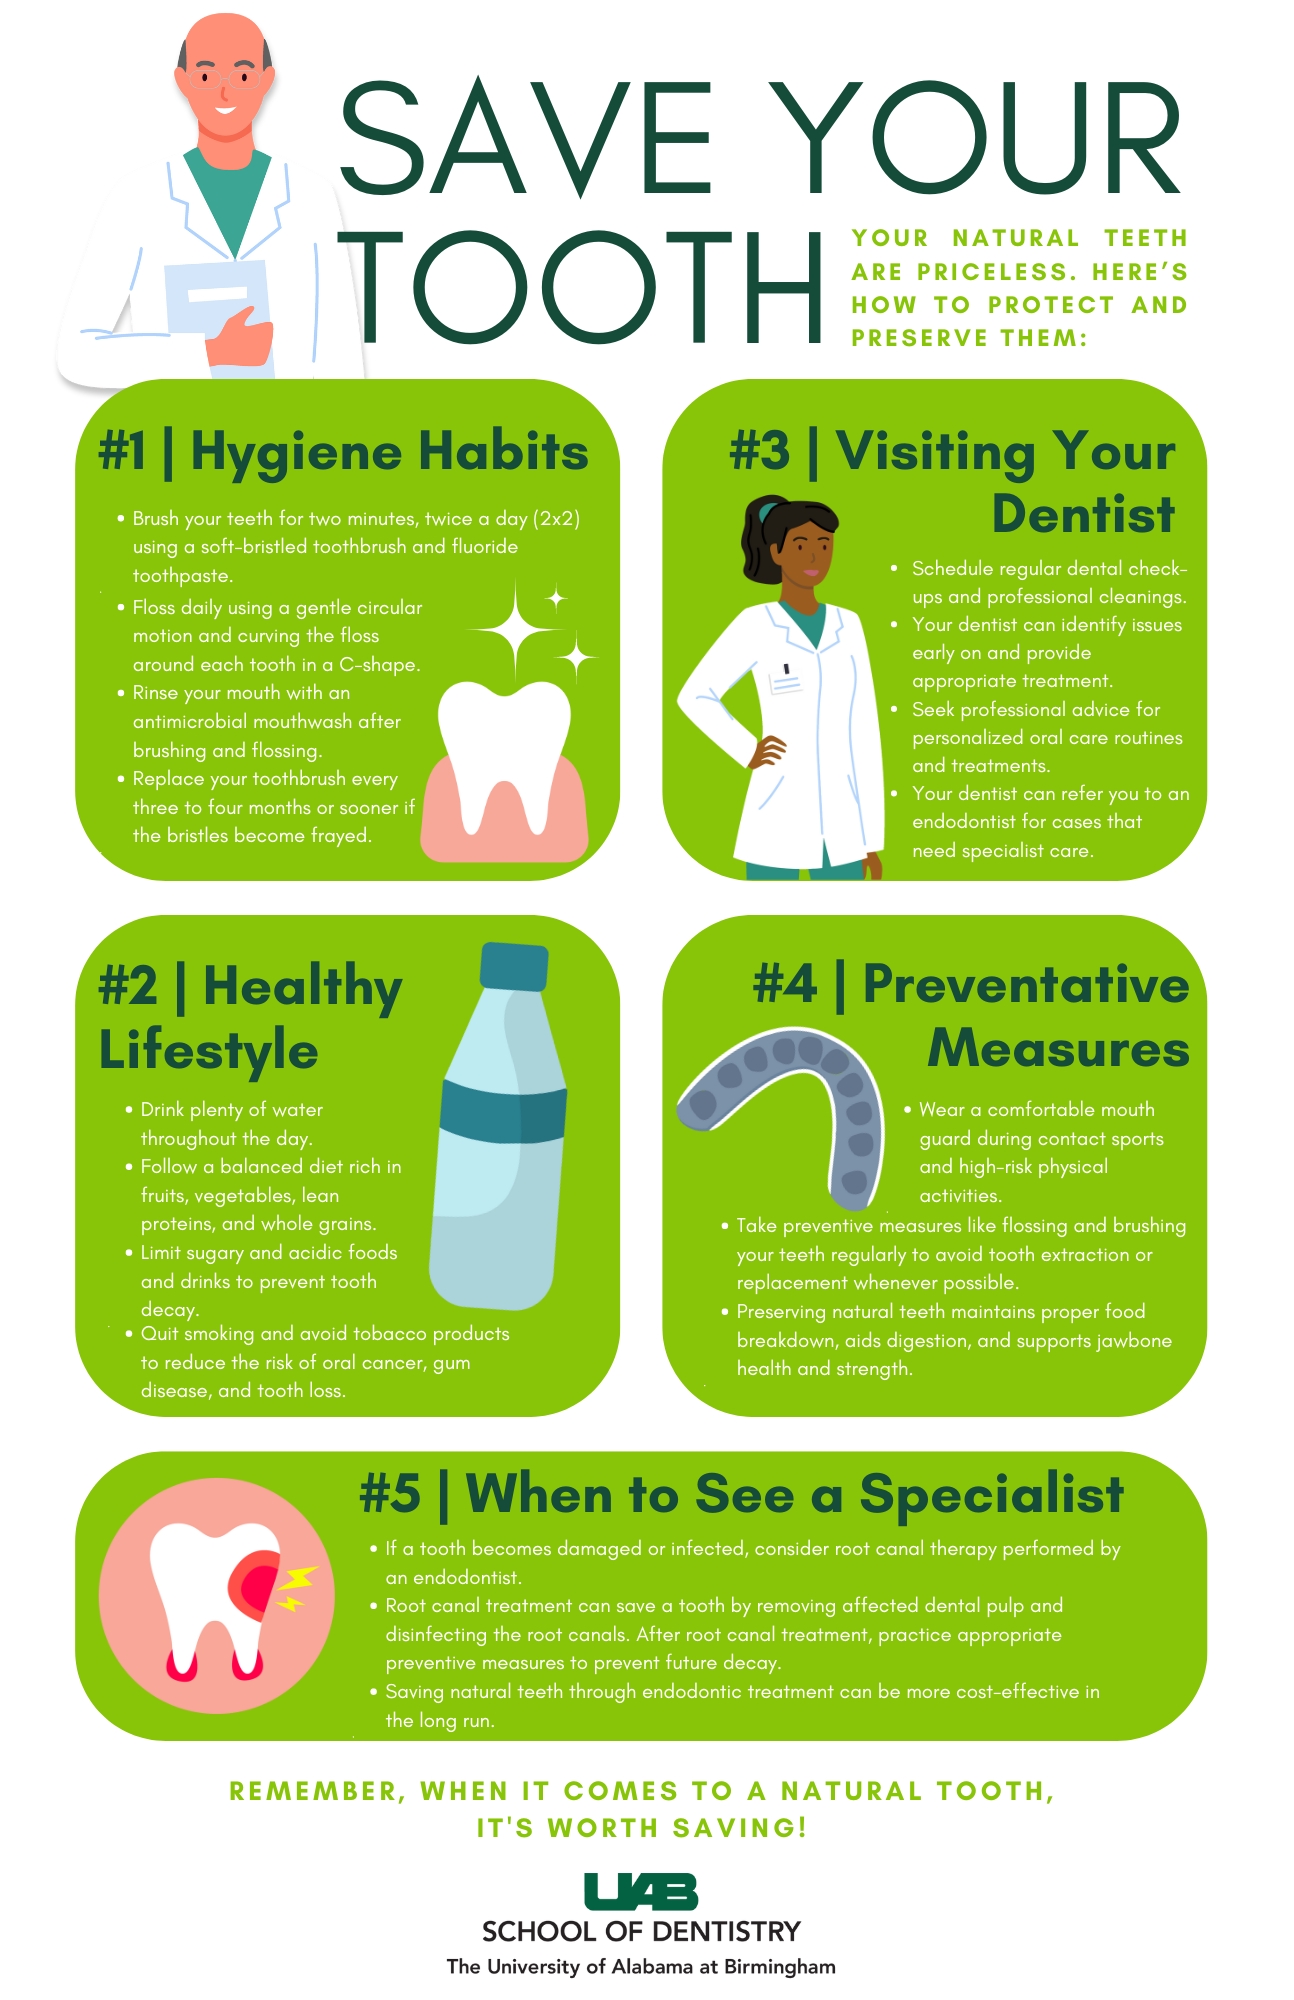 Save your tooth infographic